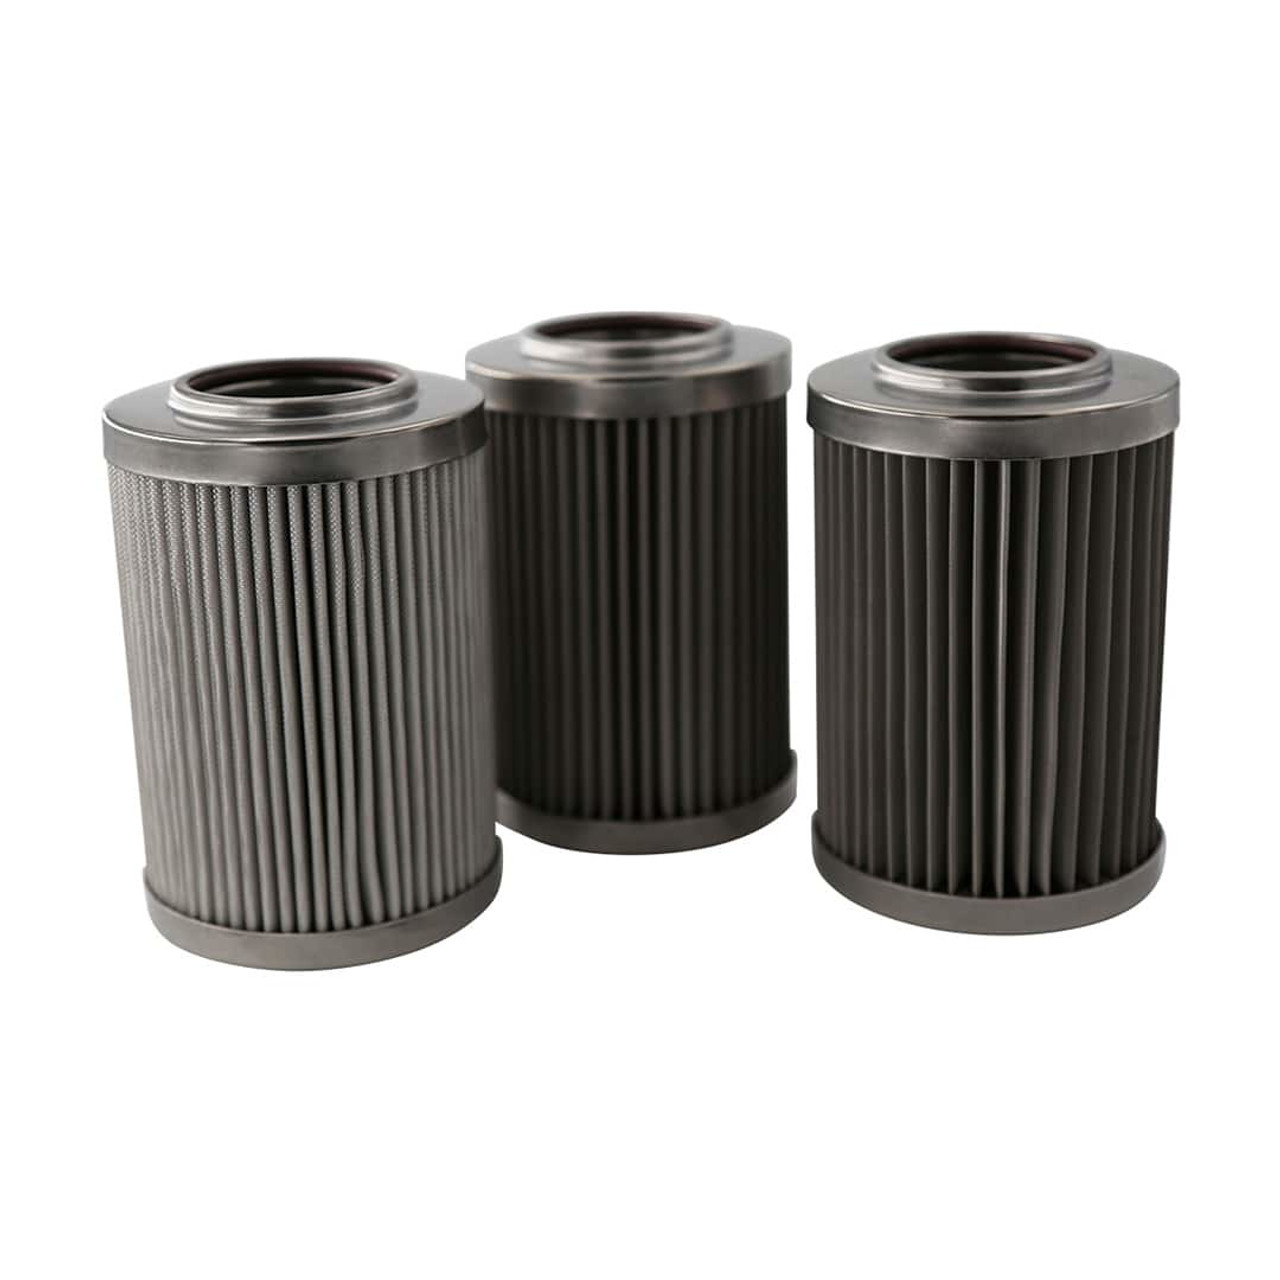 For Canister Style Filters